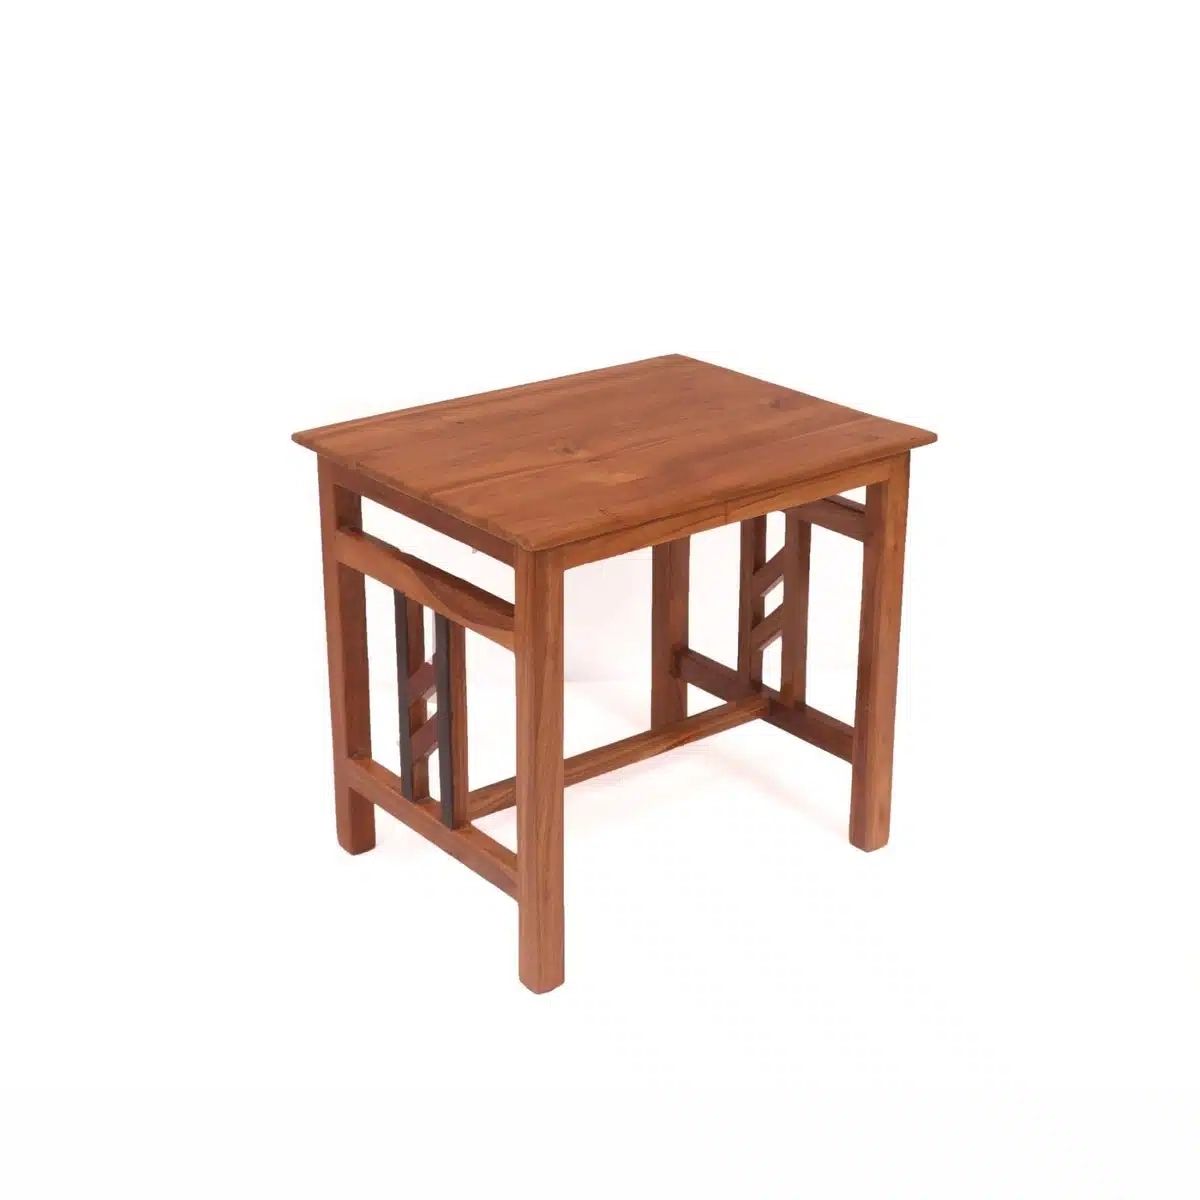 Teak Wood Coffee Table For Home | Zugunu Home Decor Pertaining To Simple Design Coffee Tables (View 14 of 15)